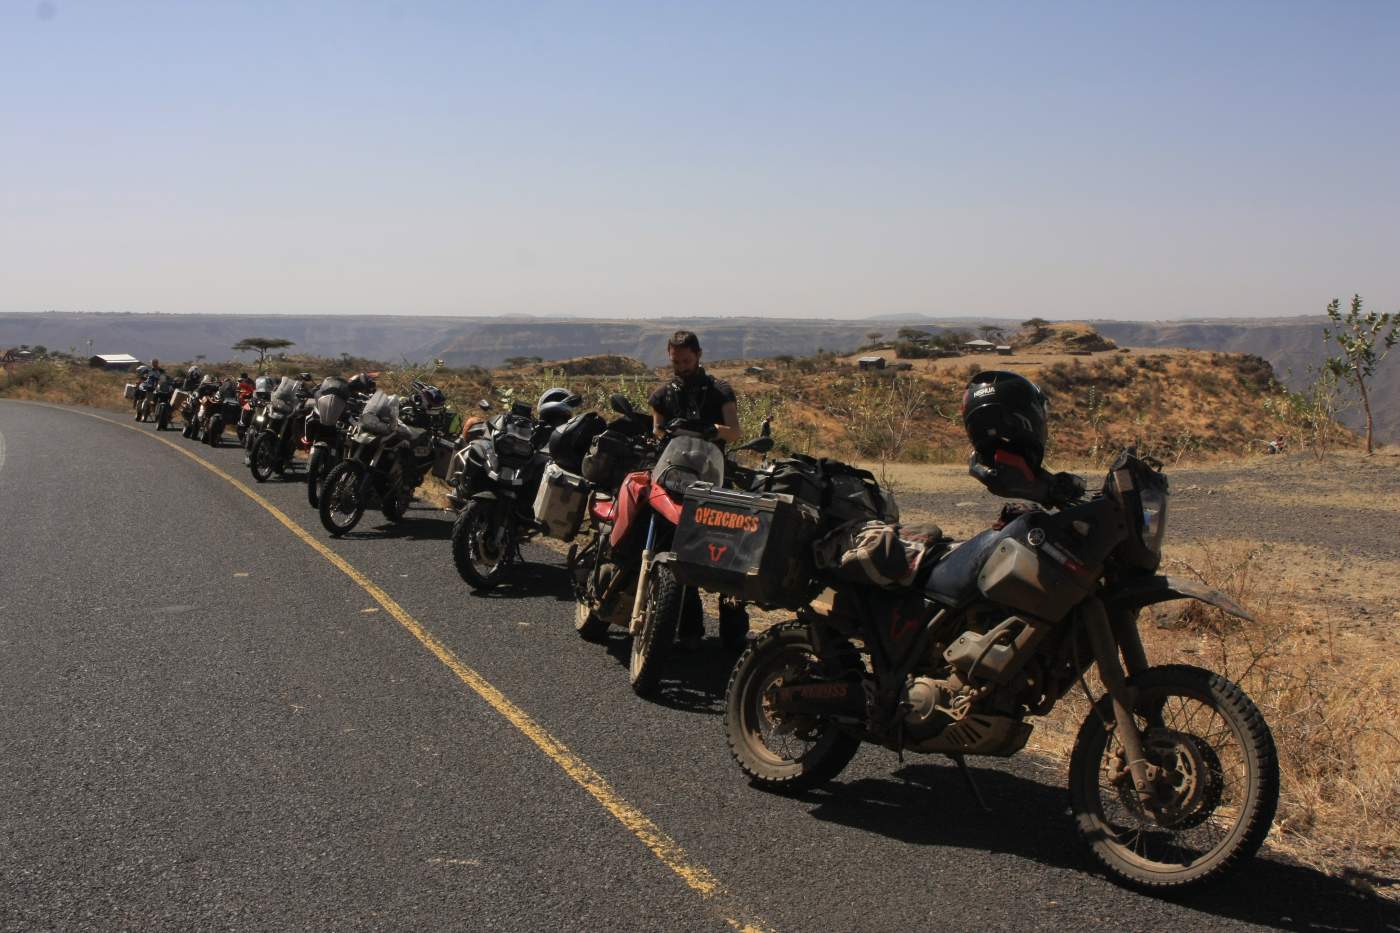 on und off road motorbike tour across africa